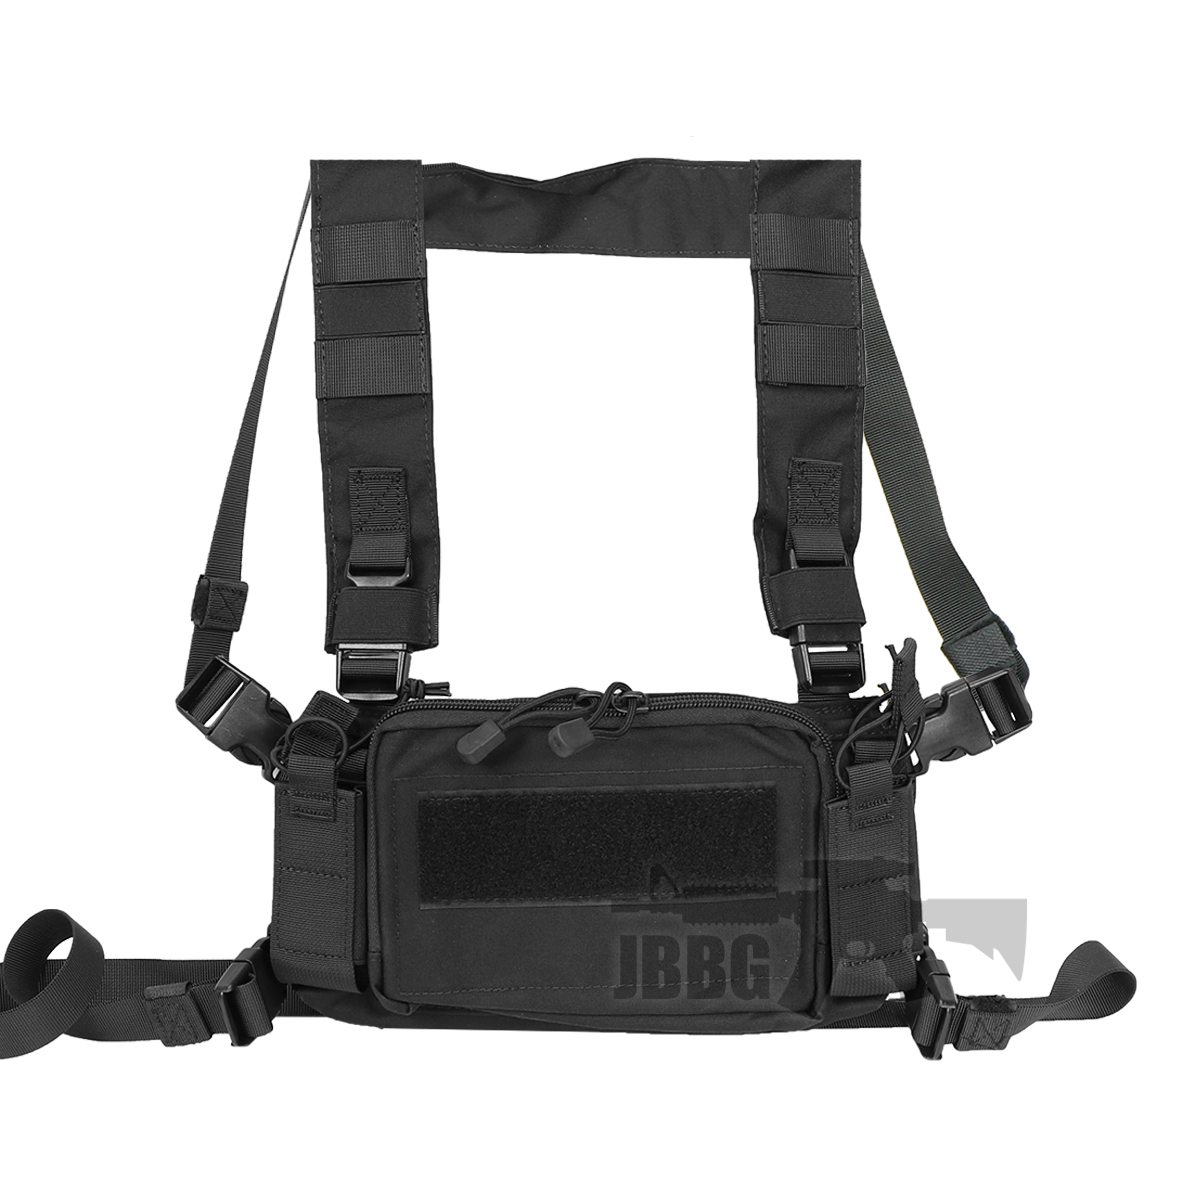 Black Tactical Chest Rig Bag For Men And Women Hip Hop Streetwear  Reflective Waist Bag With Functional Square Design 211008 From Jiao004,  $14.78 | DHgate.Com